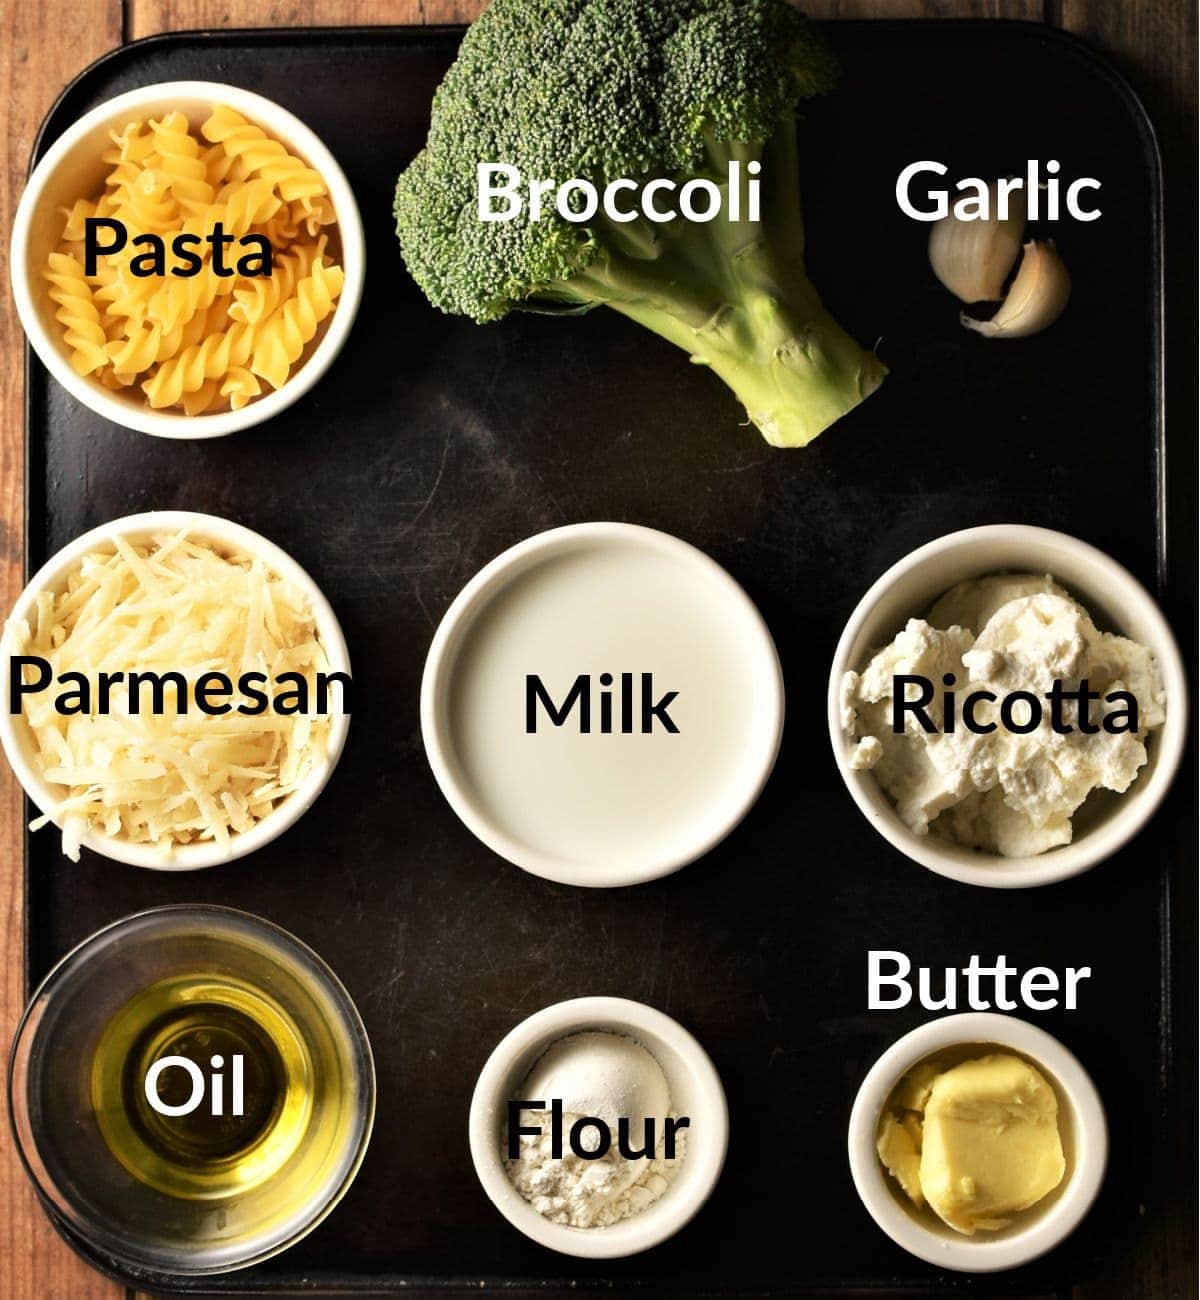 Pasta and broccoli recipe ingredients in individual dishes.